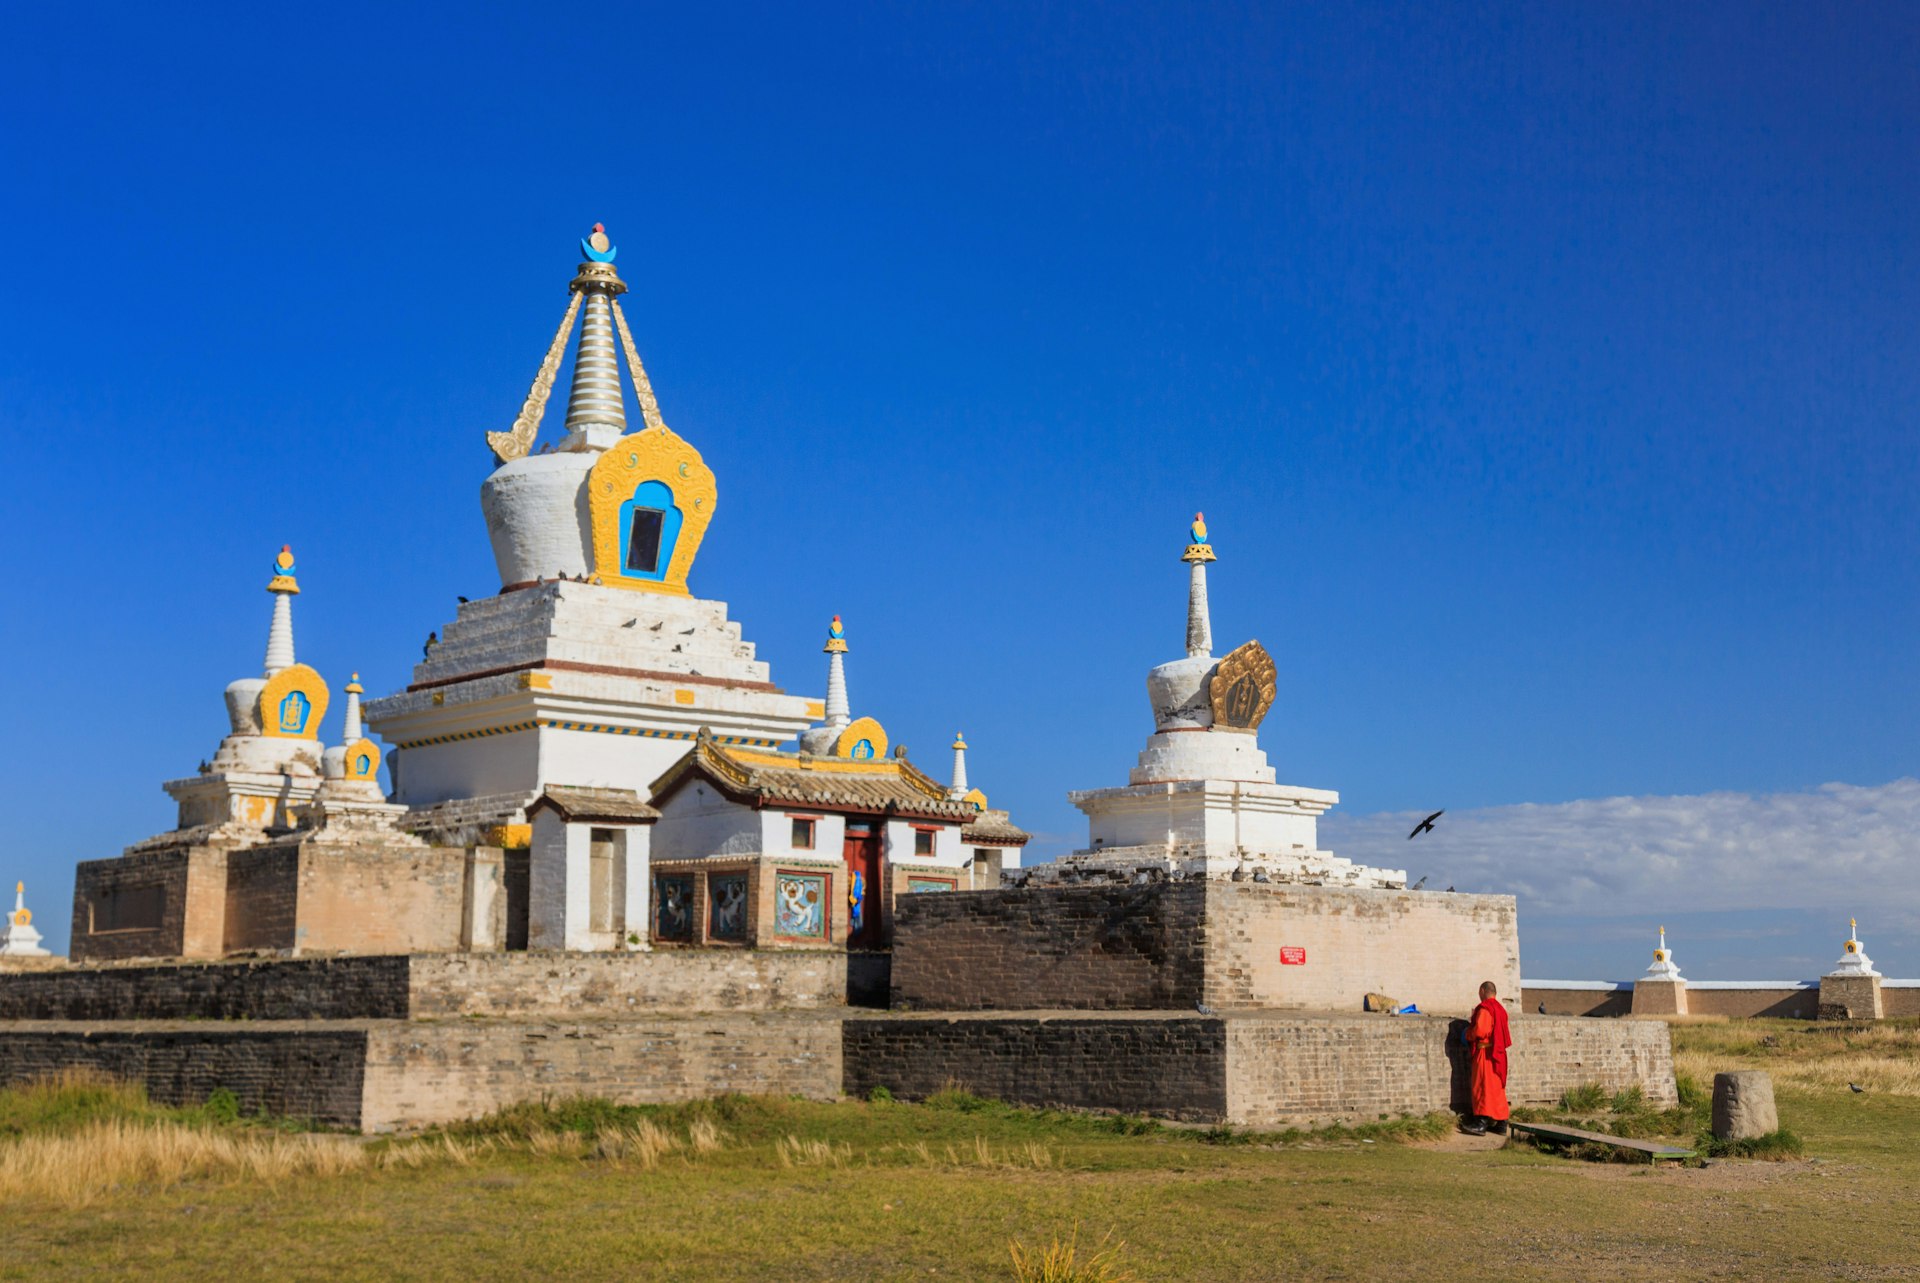 A Buddhist monk in red robes stands before a stupa